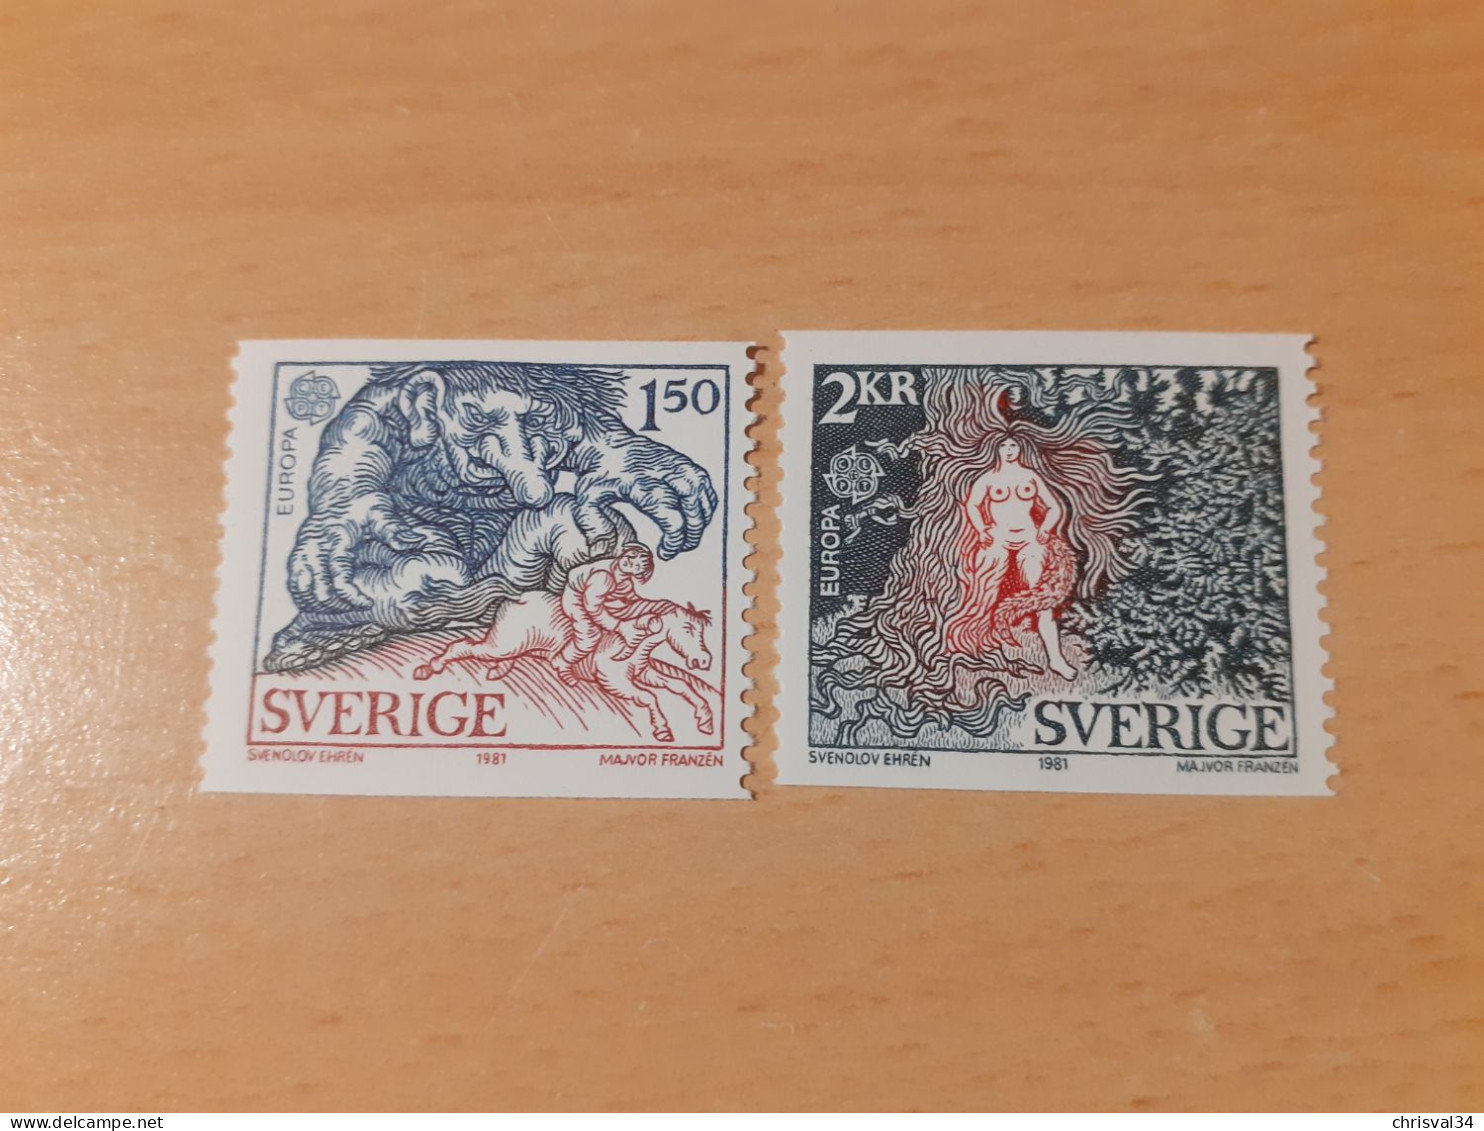 TIMBRES   EUROPA   1981  SUEDE   N  1124  / 1125   COTE  3,00  EUROS    NEUFS  LUXE** - 1981